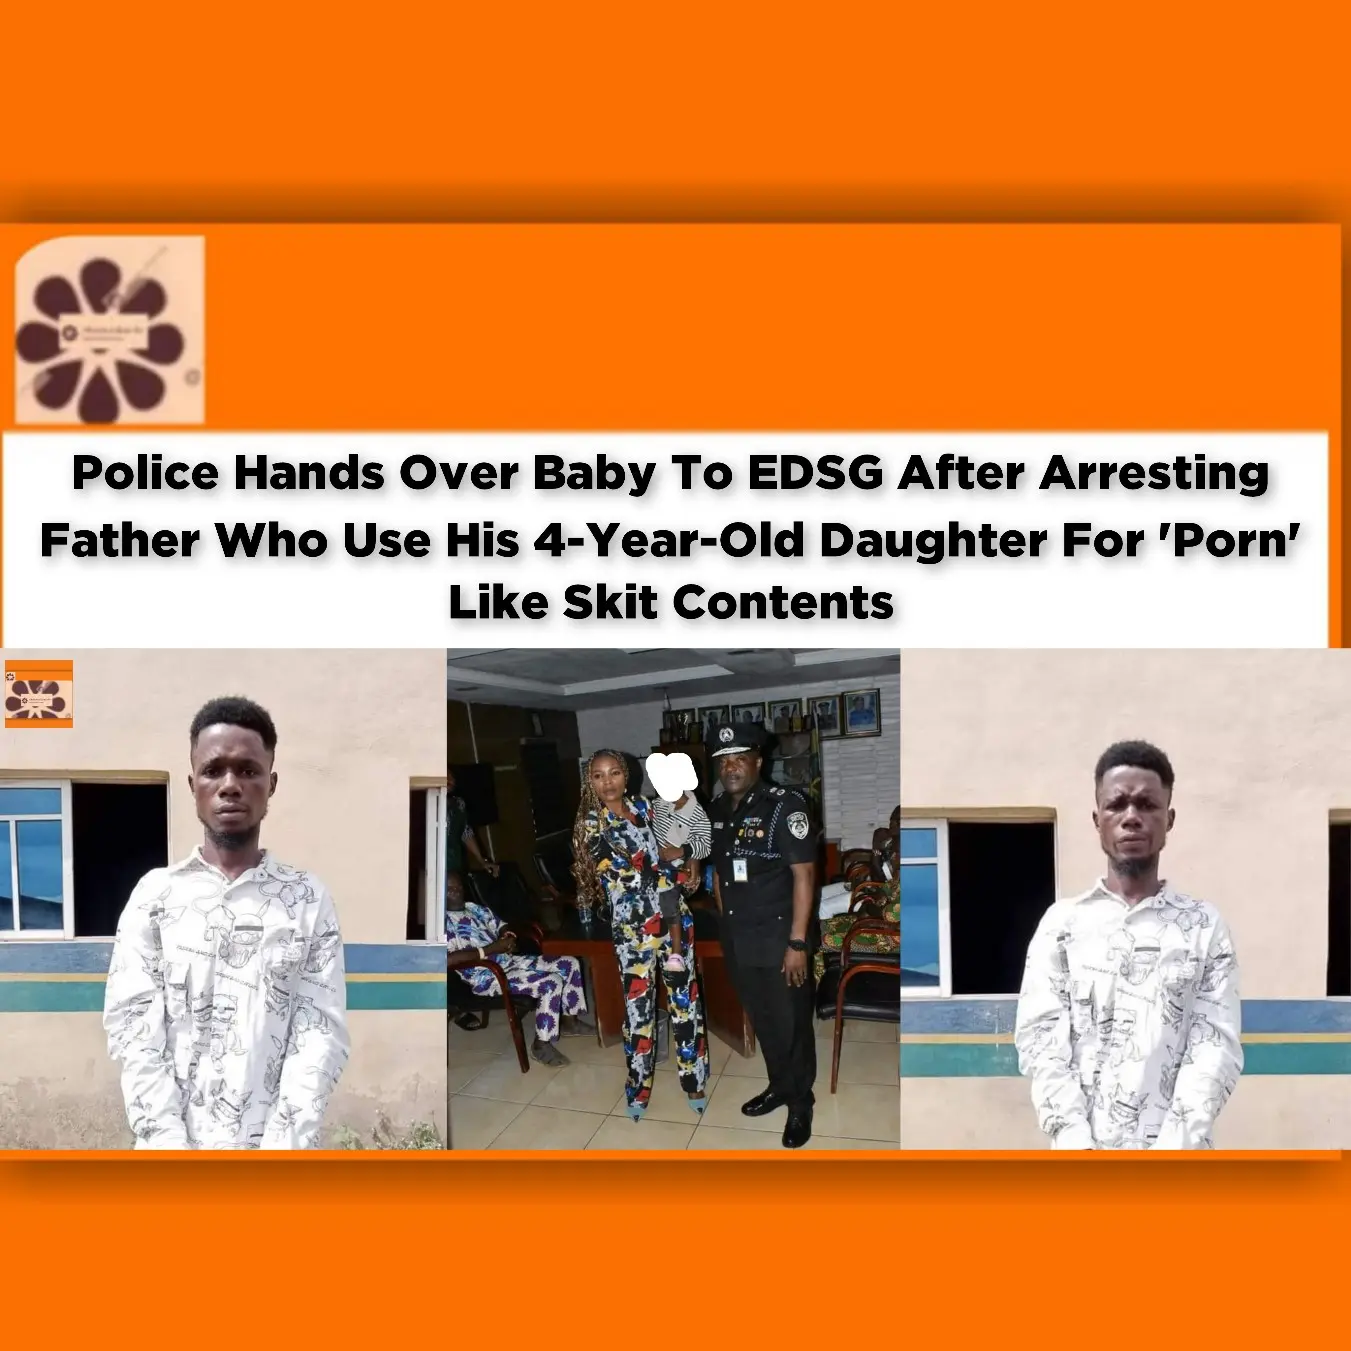 Police Hands Over Baby To EDSG After Arresting Father Who Use His 4-Year-Old Daughter For 'Porn' Like Skit Contents ~ OsazuwaAkonedo #Abuse #Auchi #Child #EDSG #Musa #Police #Sarah #Suleiman